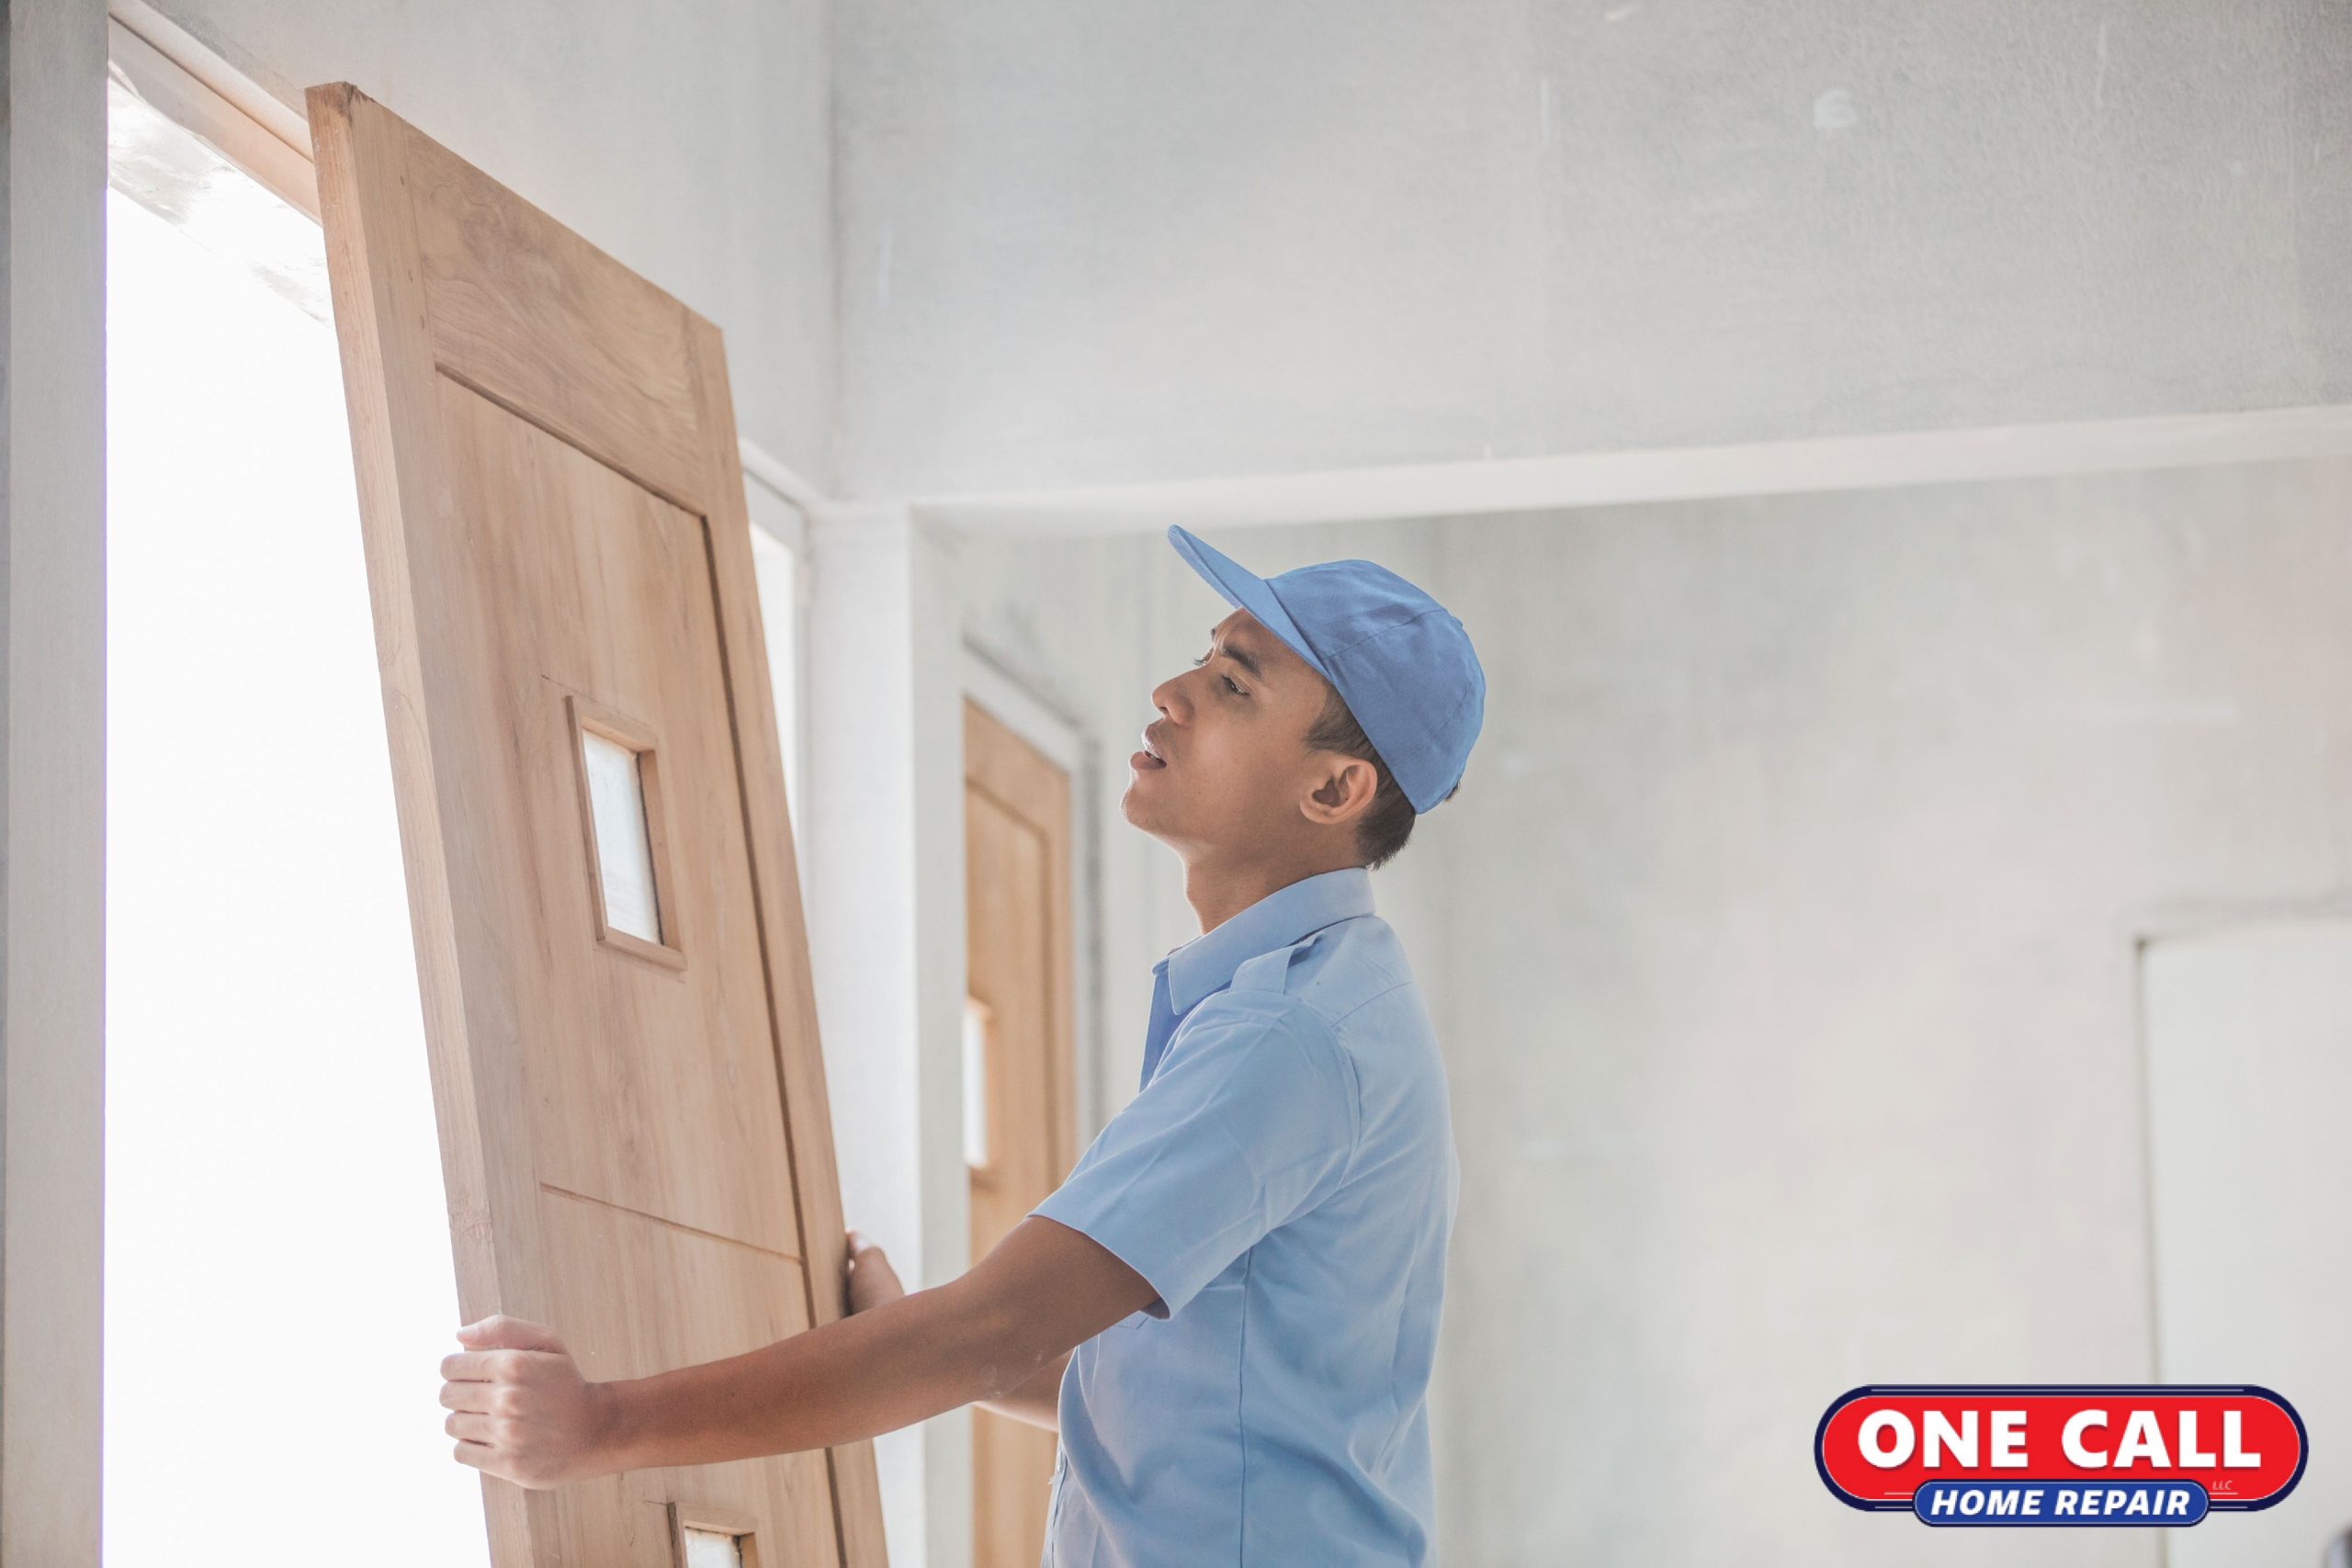 One Call Home Repair Can Install Your Home’s Interior and Exterior Doors with Ease!